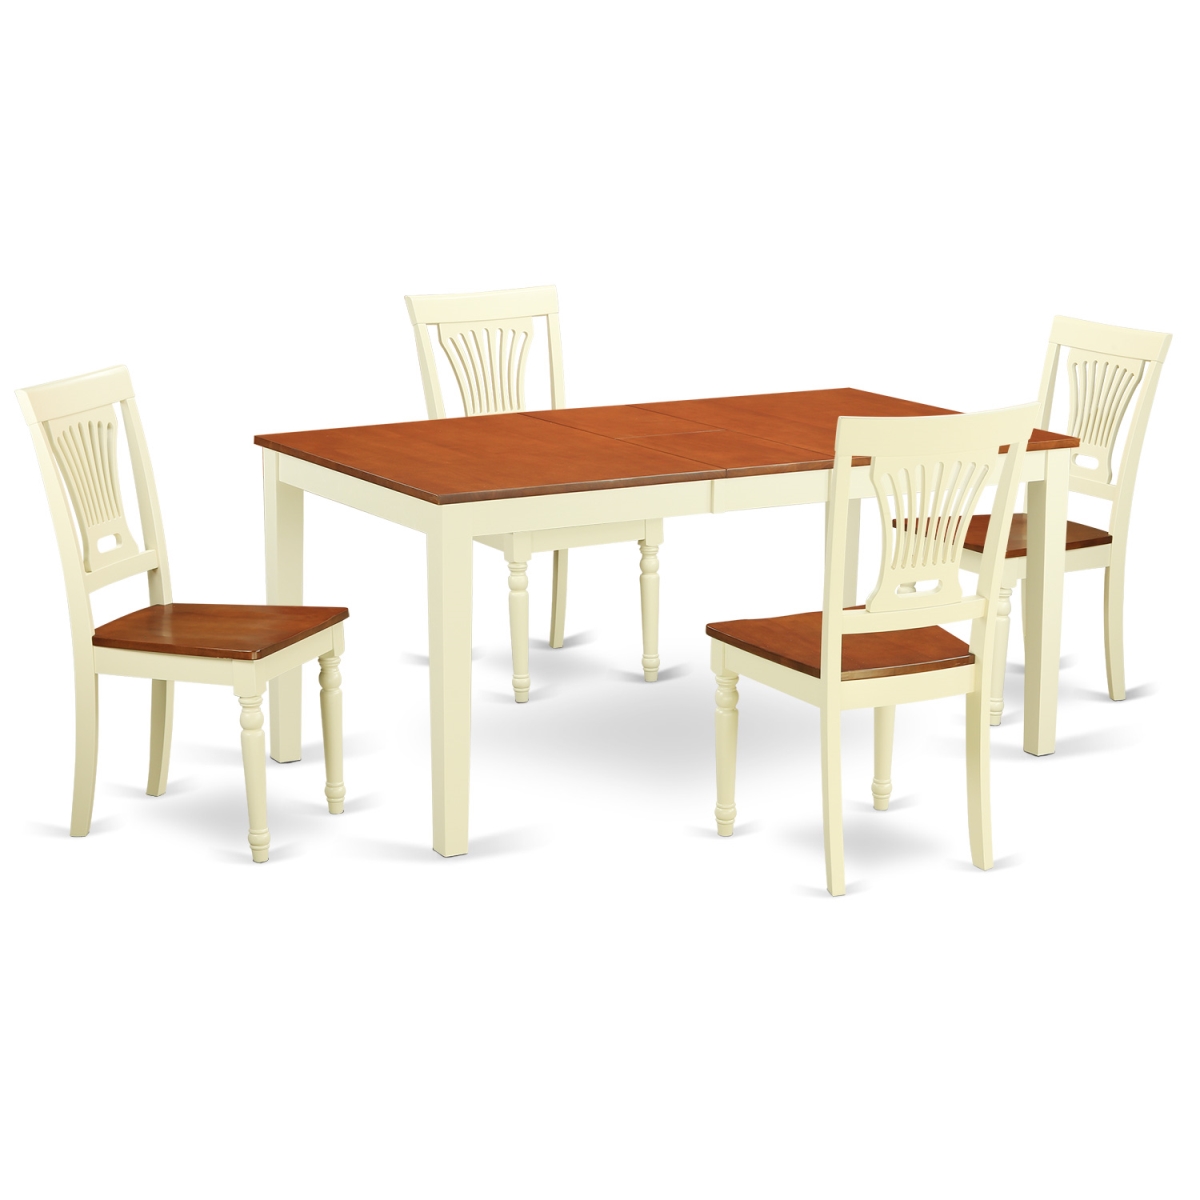 NIPL5-WHI-W Dining Table Set - Kitchen Table & 4 Chairs, Buttermilk & Cherry - 5 Piece -  East West Furniture